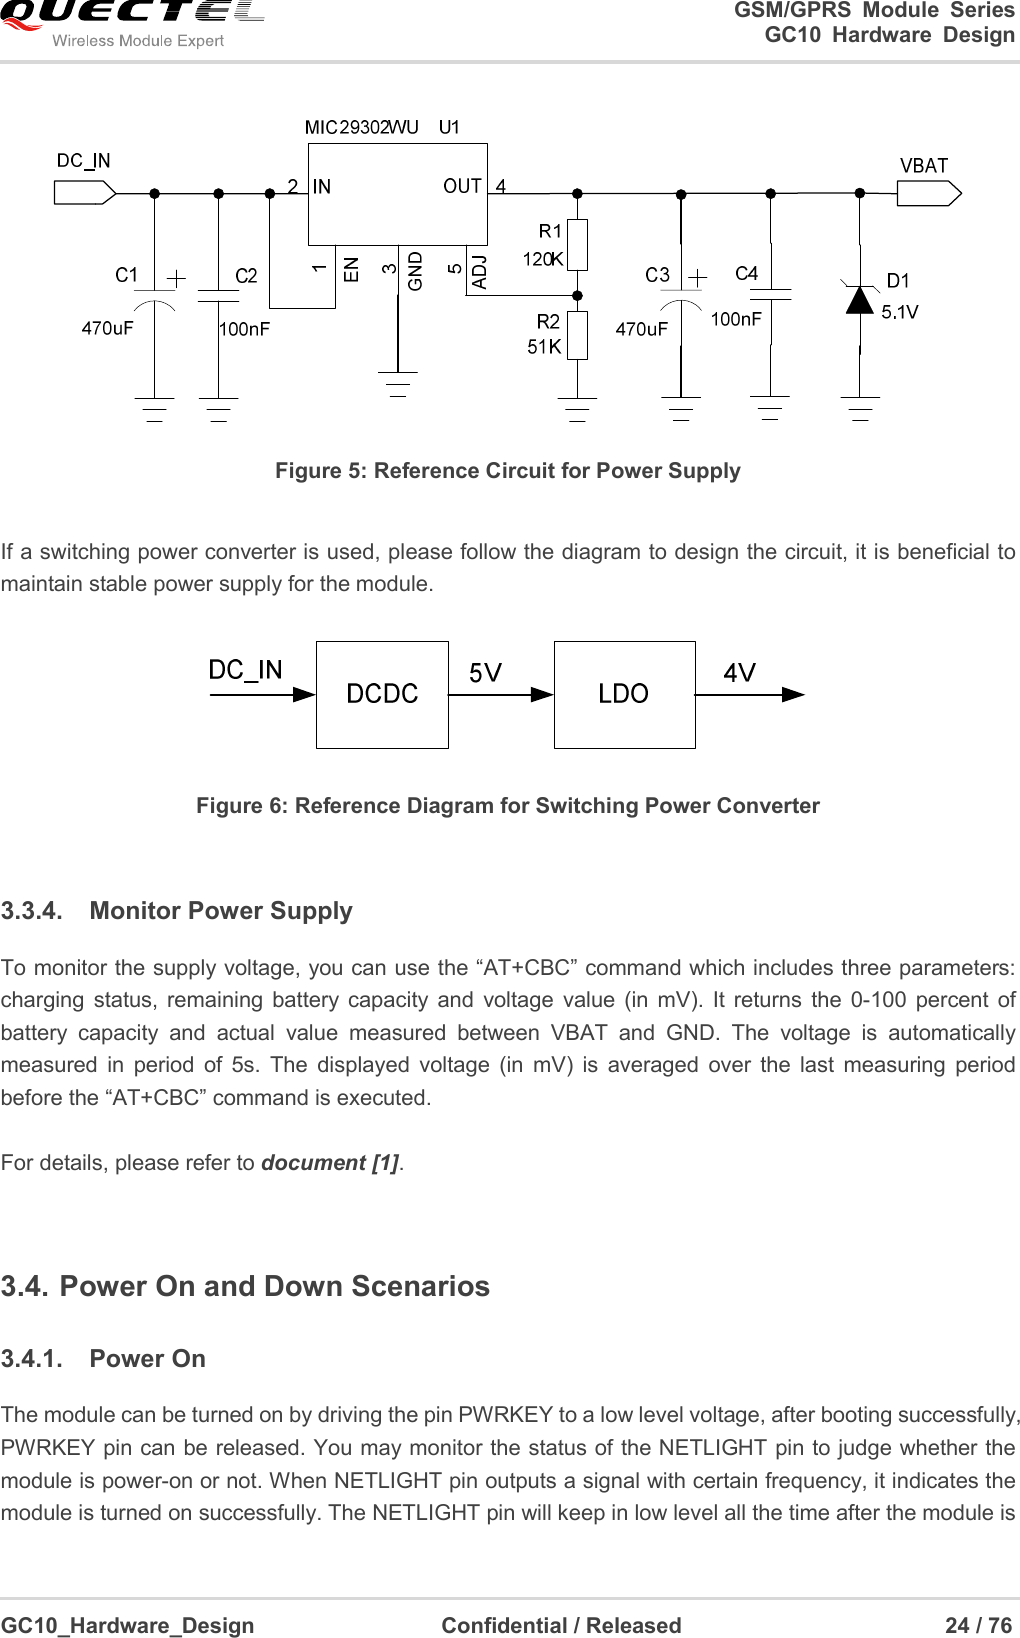                                                                          GSM/GPRS  Module  Series                                                                 GC10 Hardware Design  GC10_Hardware_Design                                  Confidential / Released                                                24 / 76       Figure 5: Reference Circuit for Power Supply  If a switching power converter is used, please follow the diagram to design the circuit, it is beneficial to maintain stable power supply for the module.  Figure 6: Reference Diagram for Switching Power Converter  3.3.4.  Monitor Power Supply To monitor the supply voltage, you can use the “AT+CBC” command which includes three parameters: charging  status, remaining  battery capacity  and  voltage  value  (in  mV).  It  returns  the  0-100  percent  of battery  capacity  and  actual  value  measured  between  VBAT  and  GND.  The  voltage  is  automatically measured  in  period  of  5s.  The  displayed  voltage  (in  mV)  is  averaged  over  the  last  measuring  period before the “AT+CBC” command is executed.  For details, please refer to document [1].  3.4. Power On and Down Scenarios 3.4.1.  Power On The module can be turned on by driving the pin PWRKEY to a low level voltage, after booting successfully, PWRKEY pin can be released. You may monitor the status of the NETLIGHT pin to judge whether the module is power-on or not. When NETLIGHT pin outputs a signal with certain frequency, it indicates the module is turned on successfully. The NETLIGHT pin will keep in low level all the time after the module is 